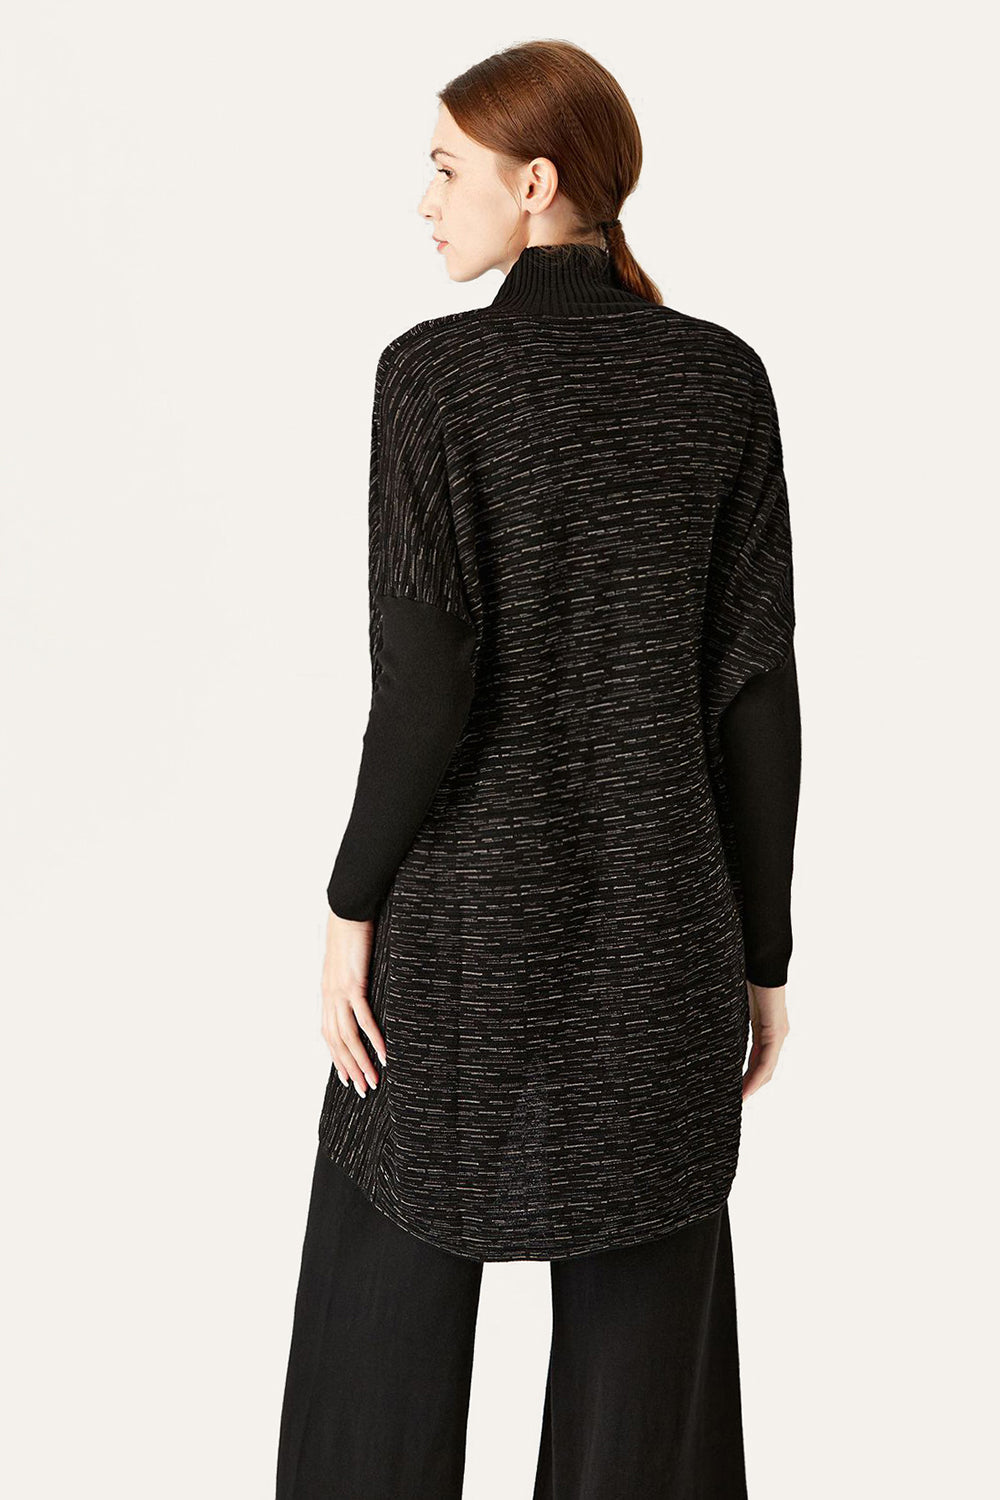 Black Asymmetrical Knitted Poncho Sweater